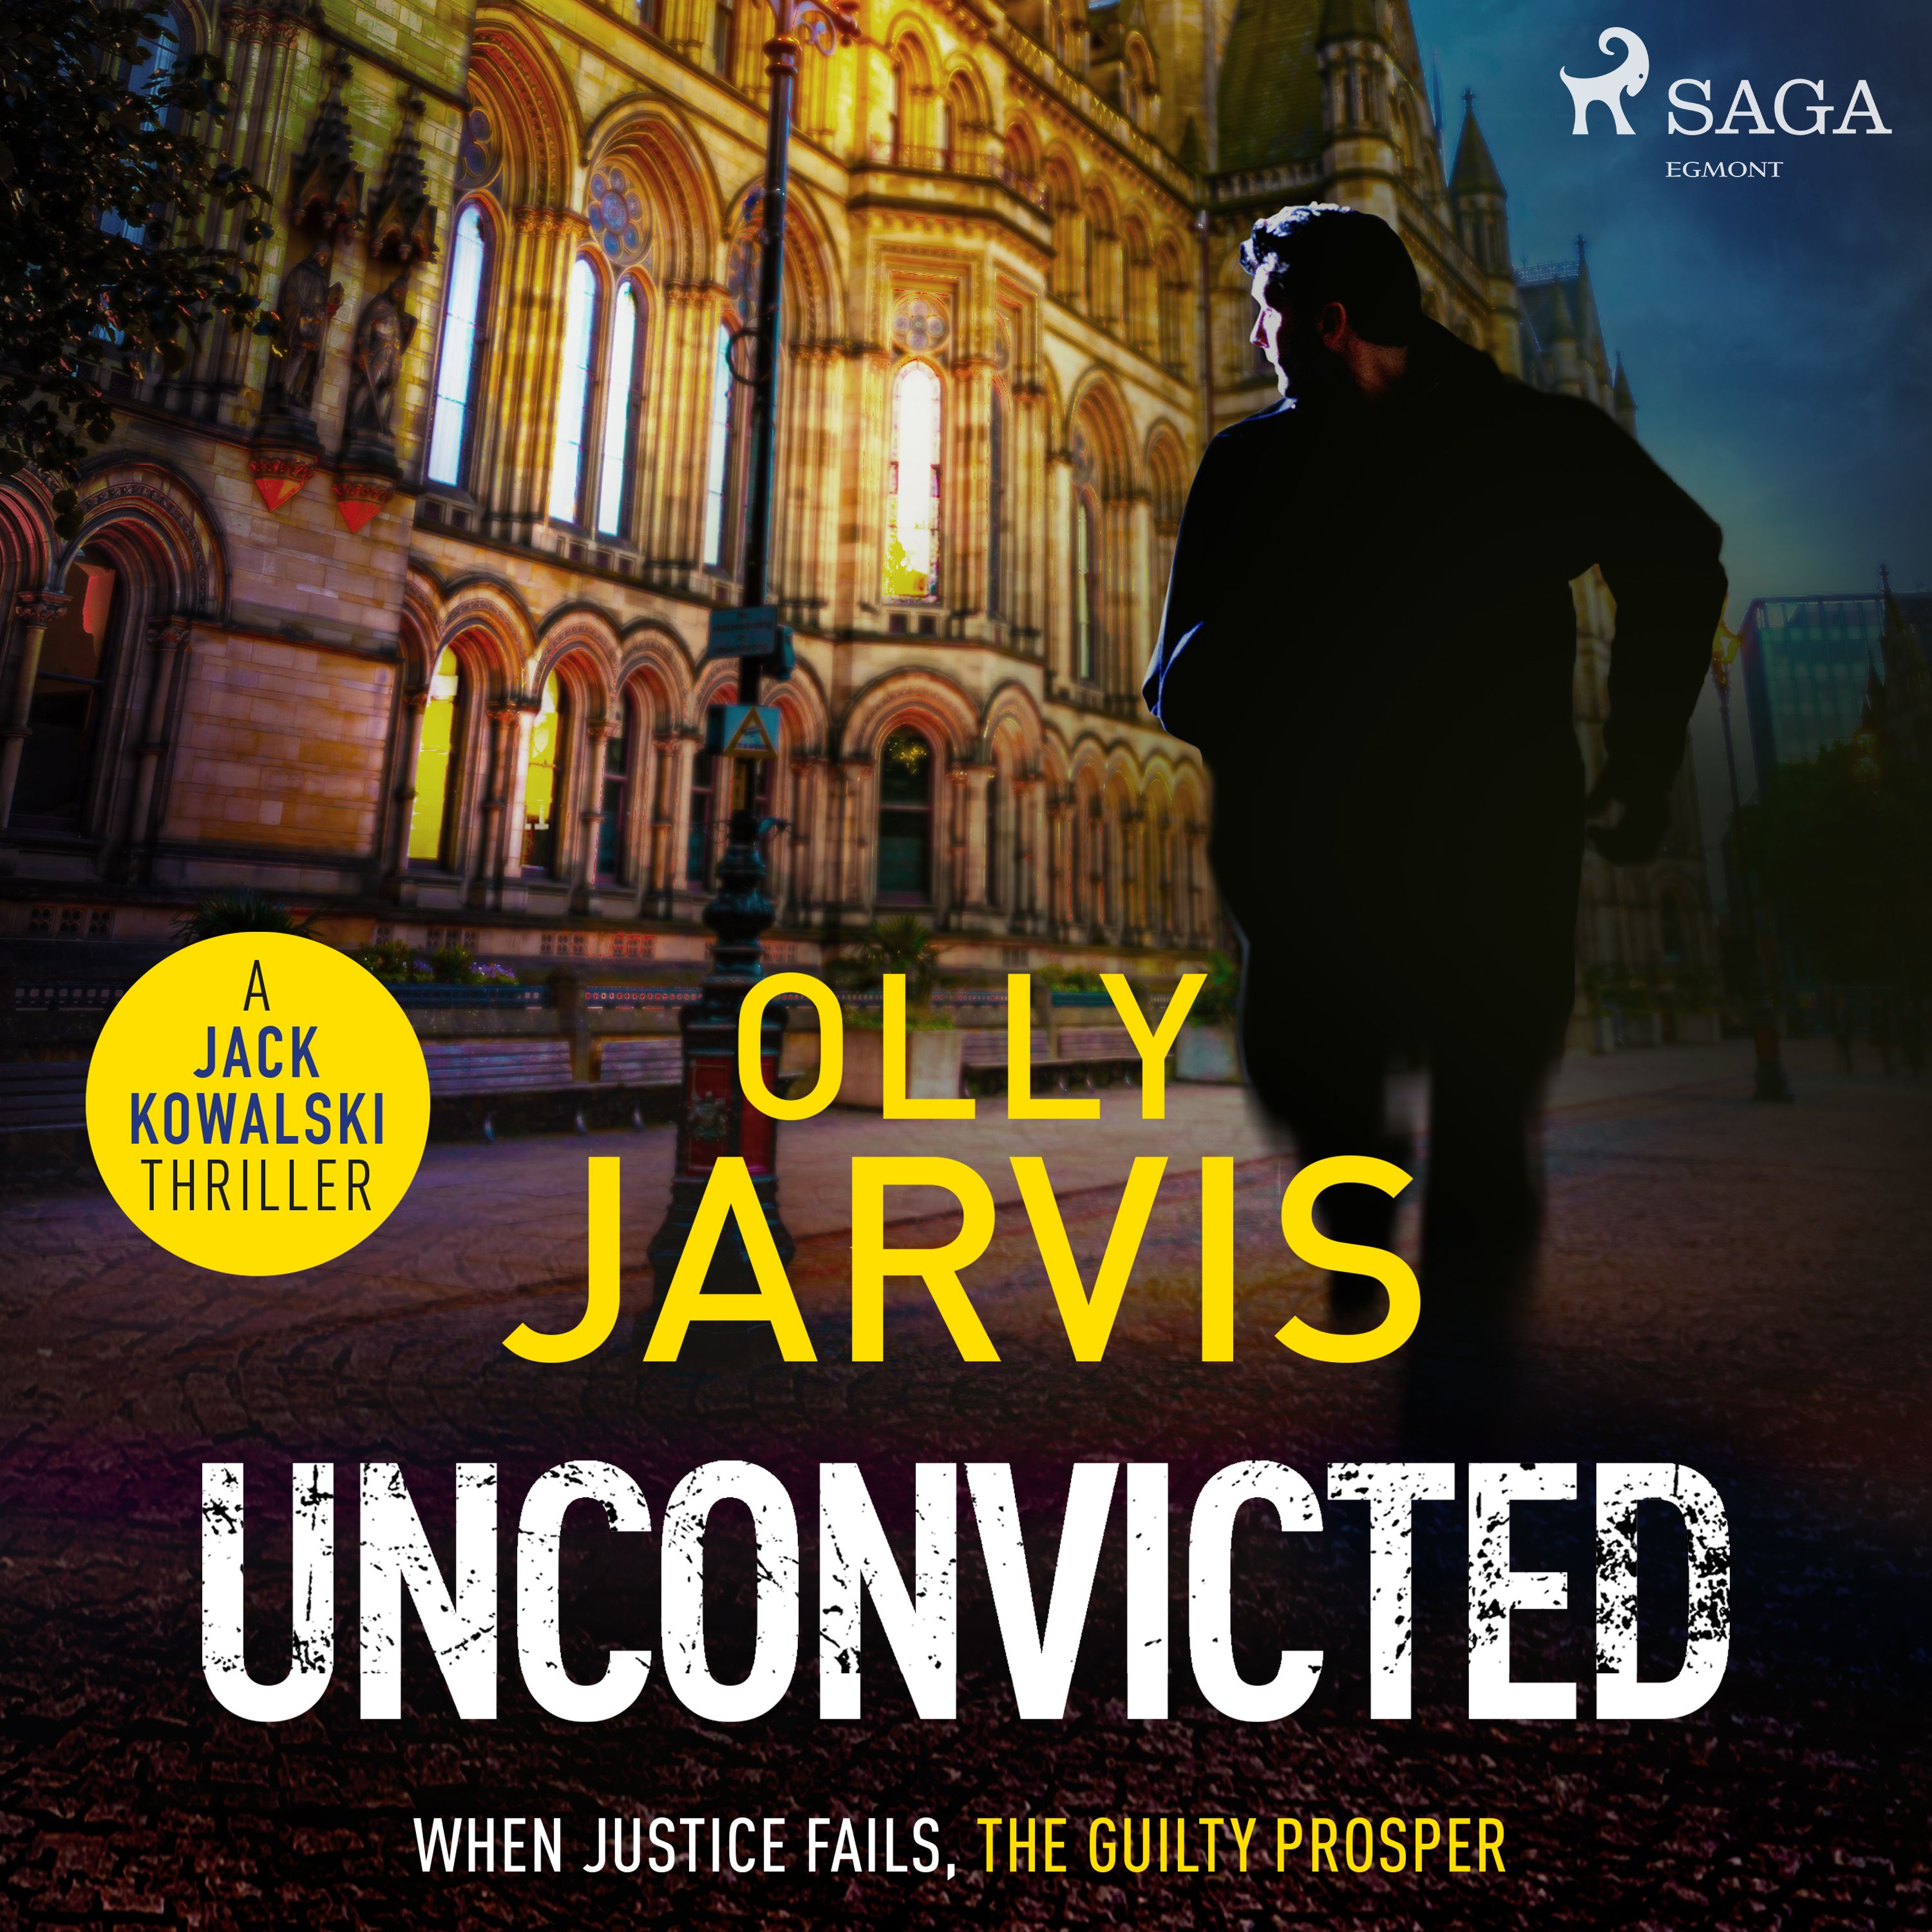 Unconvicted, audiobook by Olly Jarvis